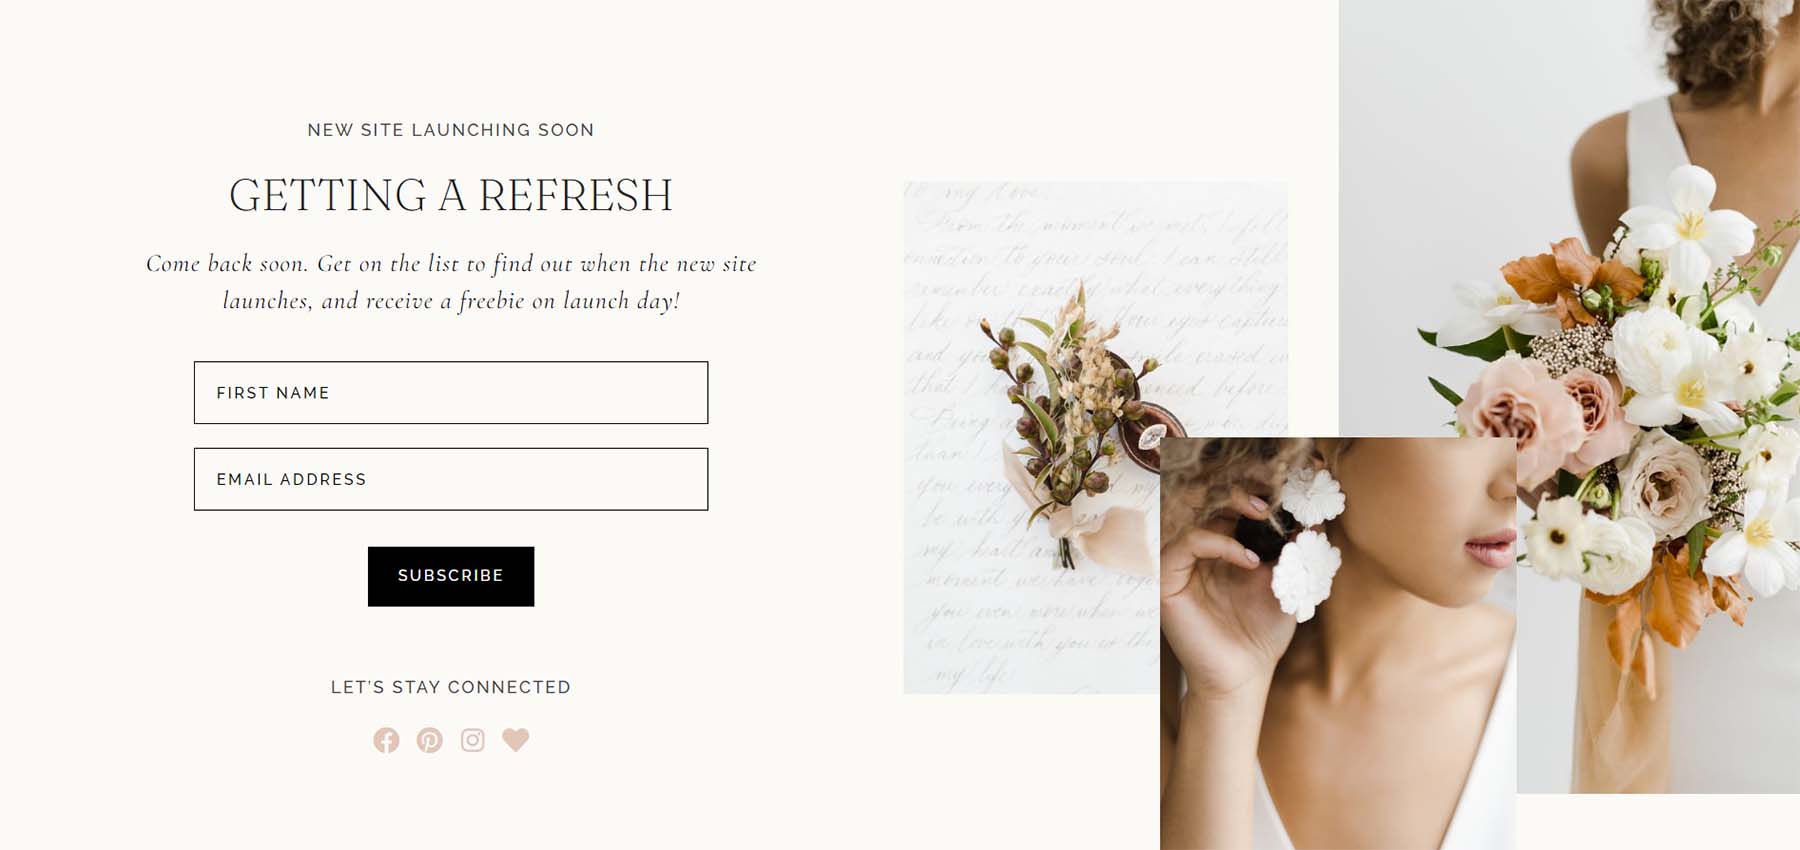 Coming soon page template for Maeve, a WordPress wedding theme